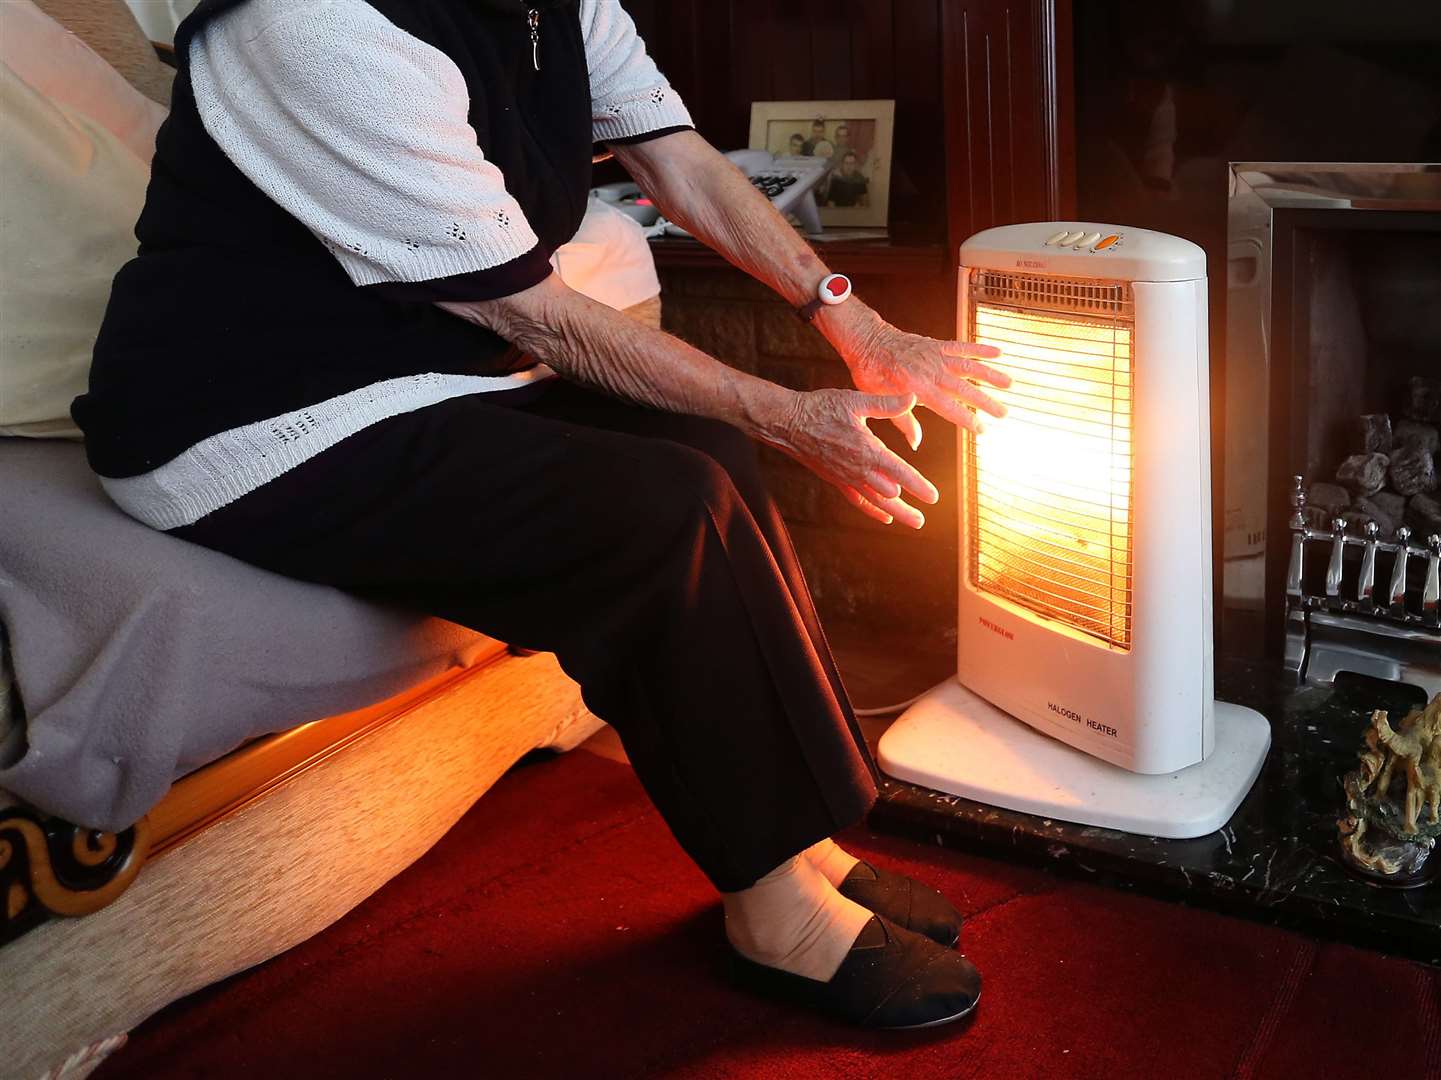 There will be automatic help with heating bills this winter.